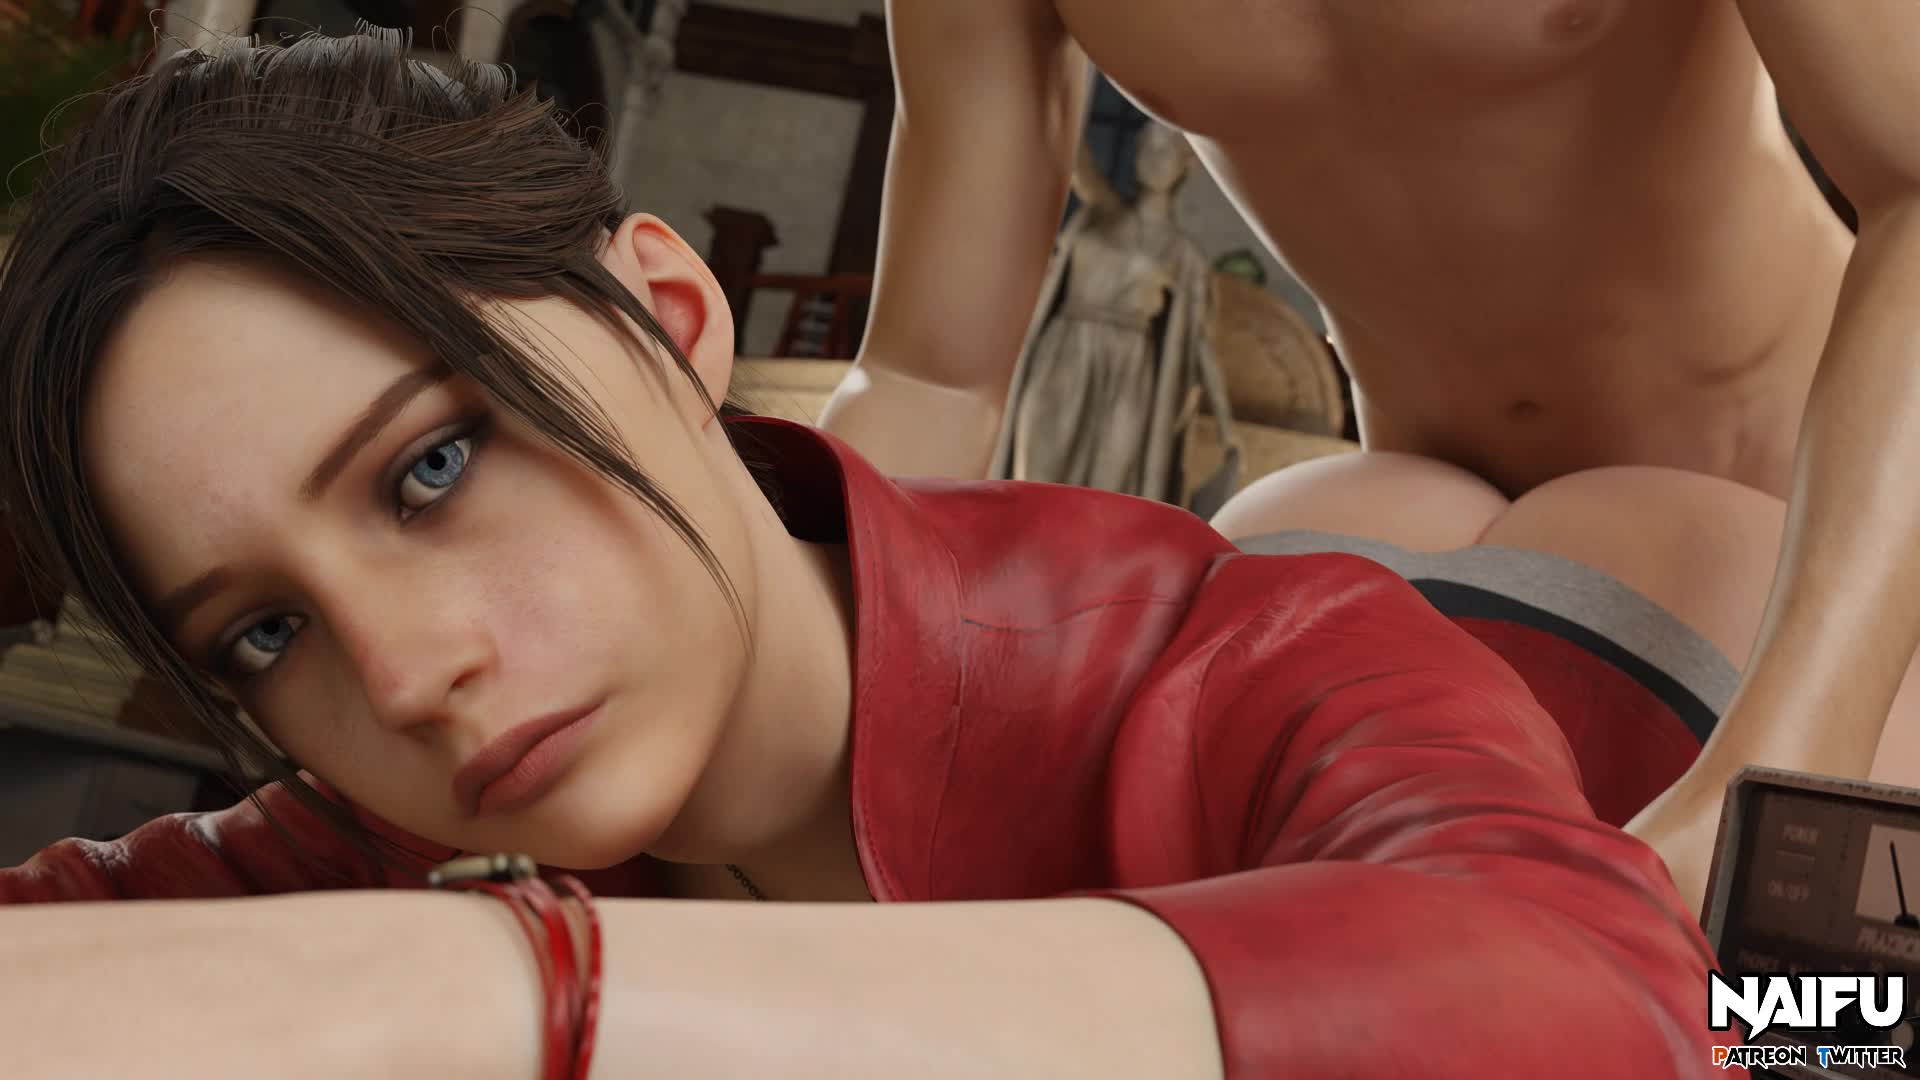 claire redfield doesnt like it very much from behind